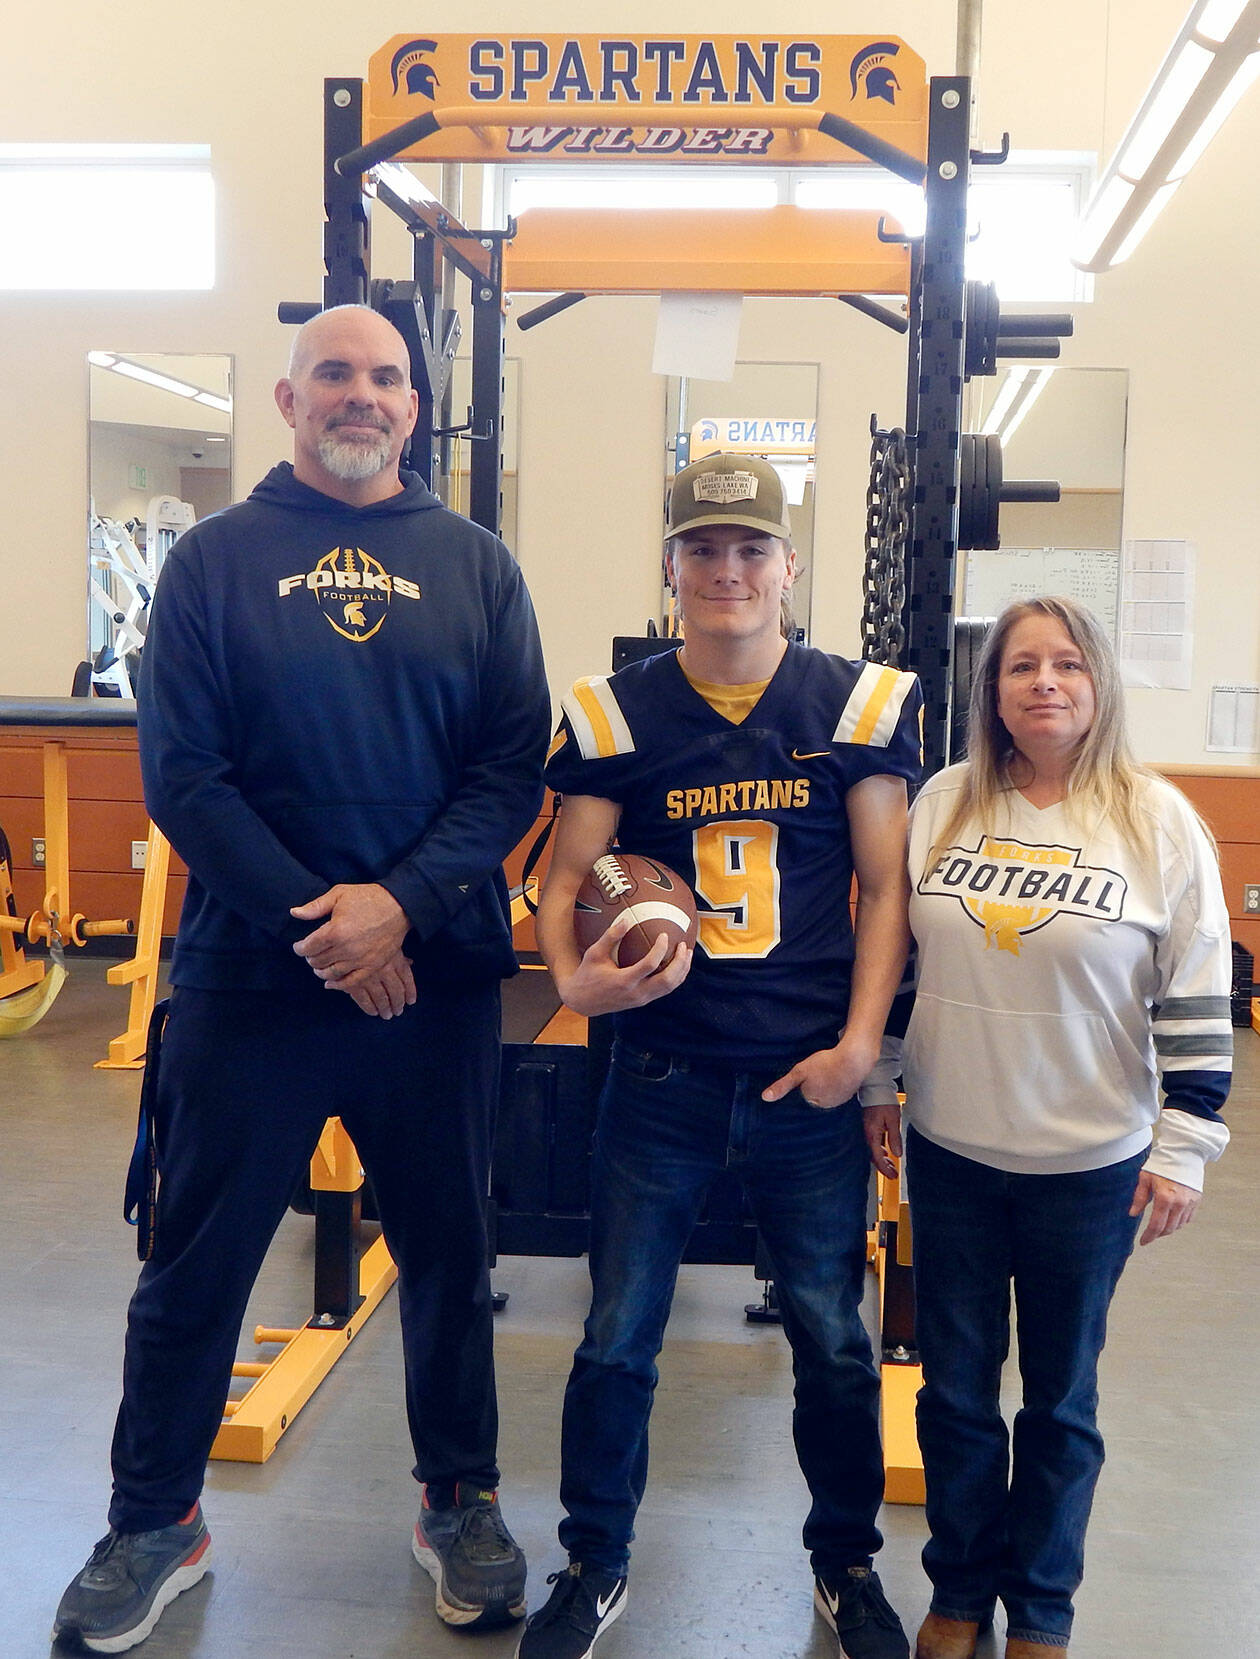 Forks’ Dalton Kilmer, center, is one of five North Olympic Peninsula athletes who will play for the West team in the Class 2A/1A/B Earl Barden Classic, the all-state football game in Yakima on Saturday. Kilmer is joined by Forks football coach Trevor Highfield and his mom, Amy Kilmer. (Christi Baron/Olympic Peninsula News Group)